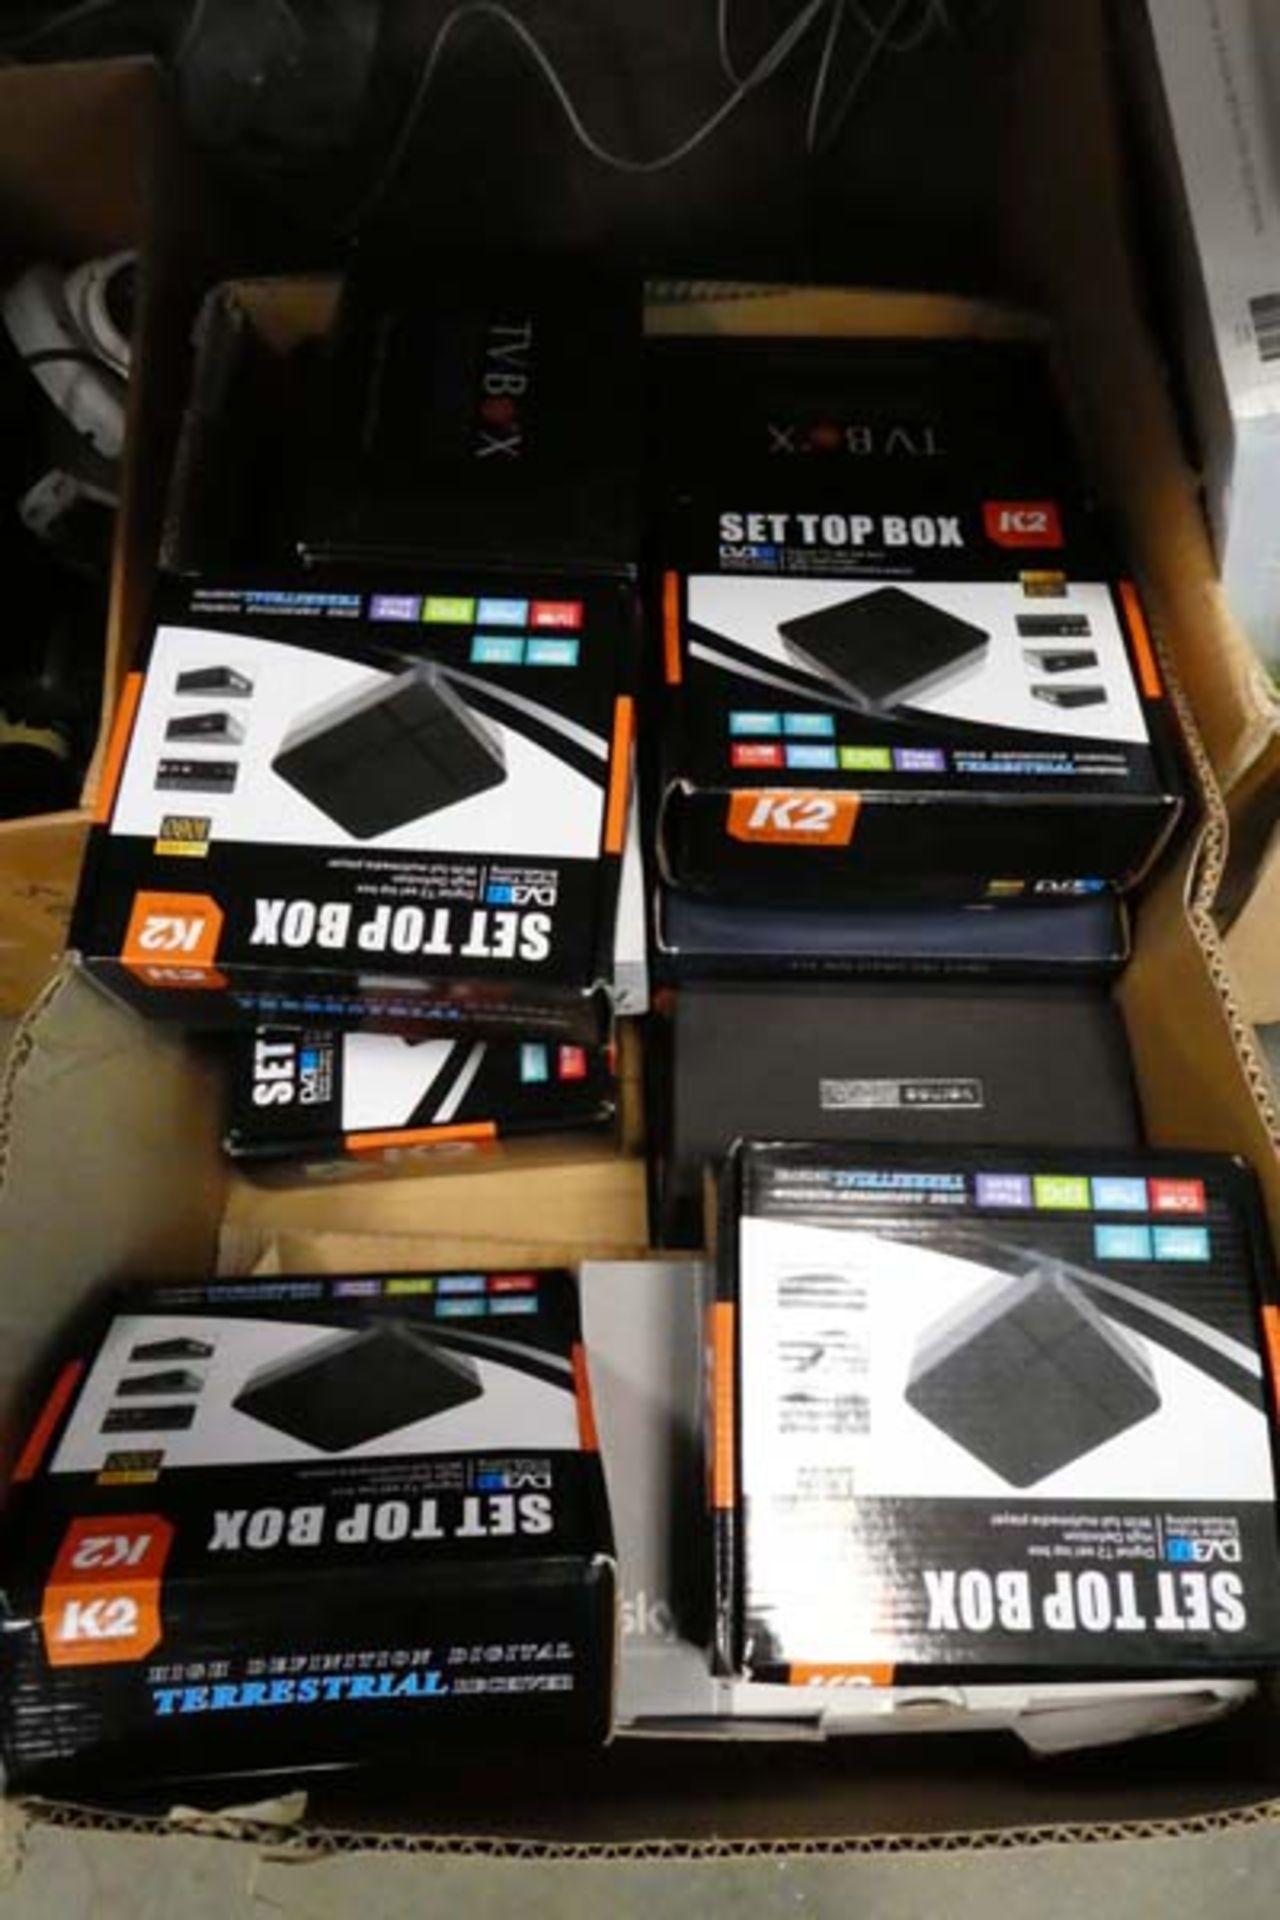 2 trays of various Android TV media set top boxes